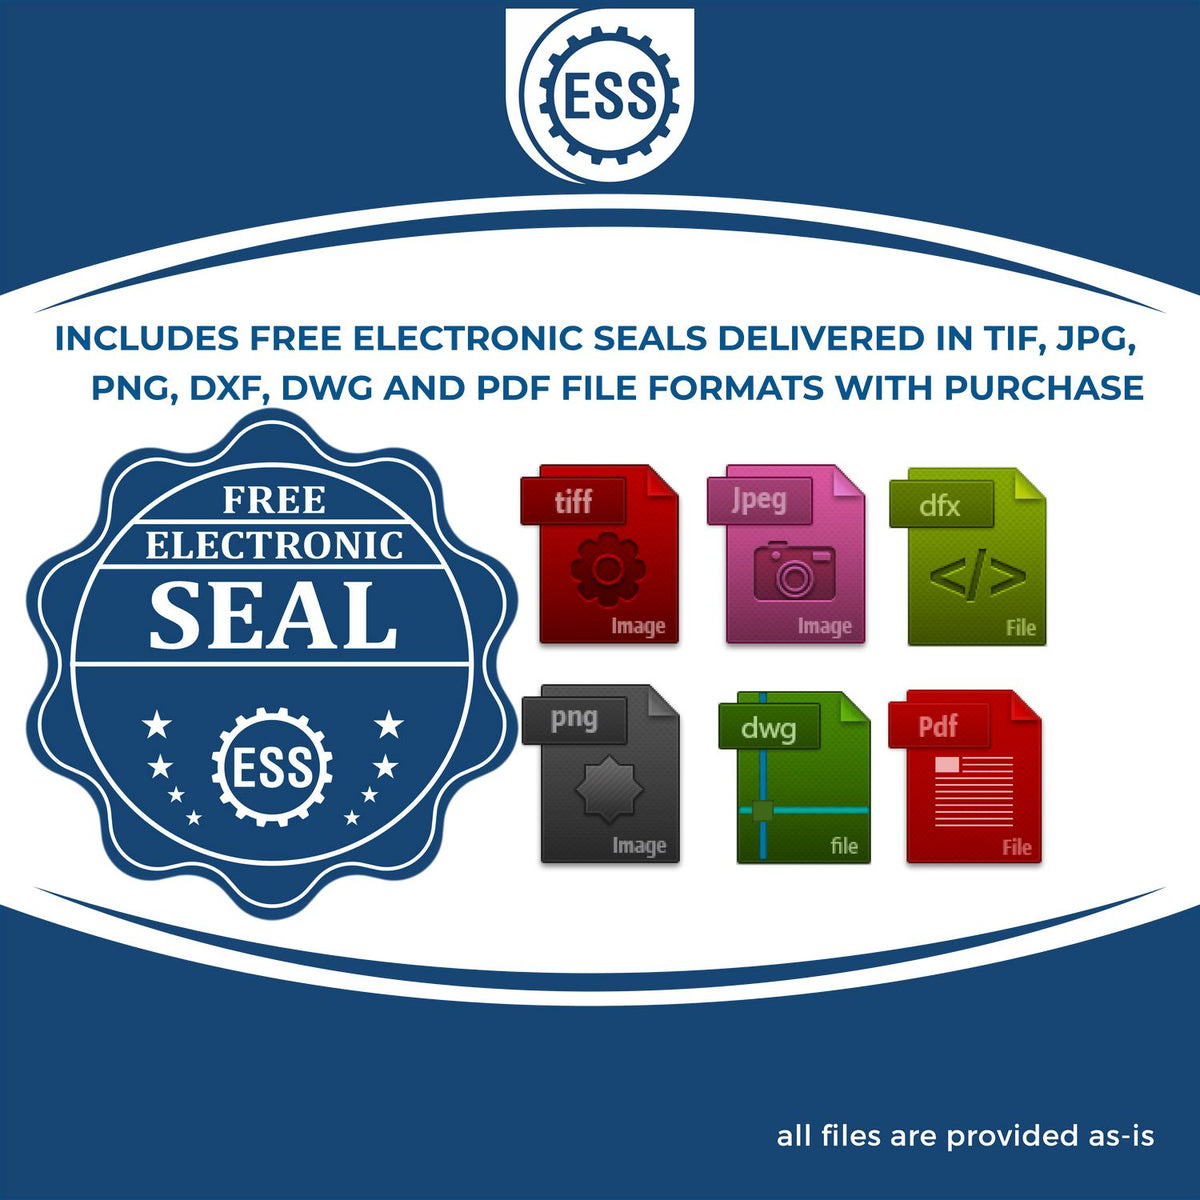 An infographic for the free electronic seal for the State of Tennessee Soft Land Surveyor Embossing Seal illustrating the different file type icons such as DXF, DWG, TIF, JPG and PNG.